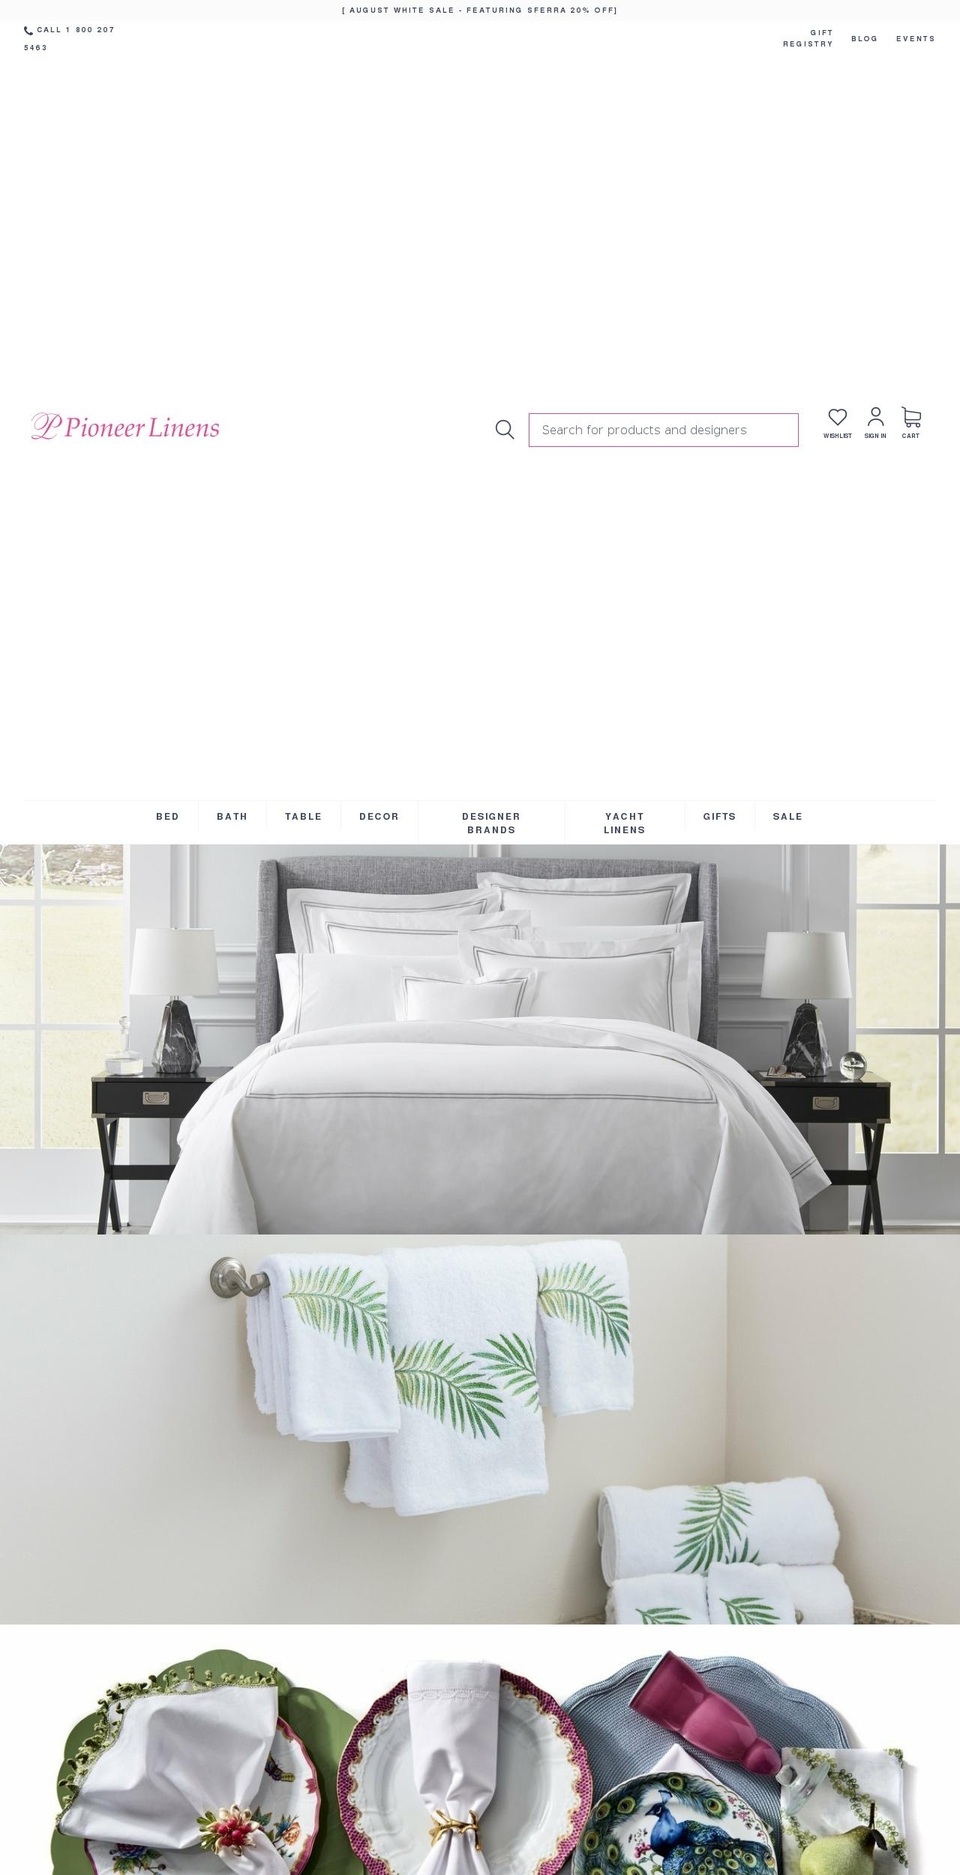 Buko Shopify Theme - Products Consolidation Shopify theme site example pioneerbedlinens.com